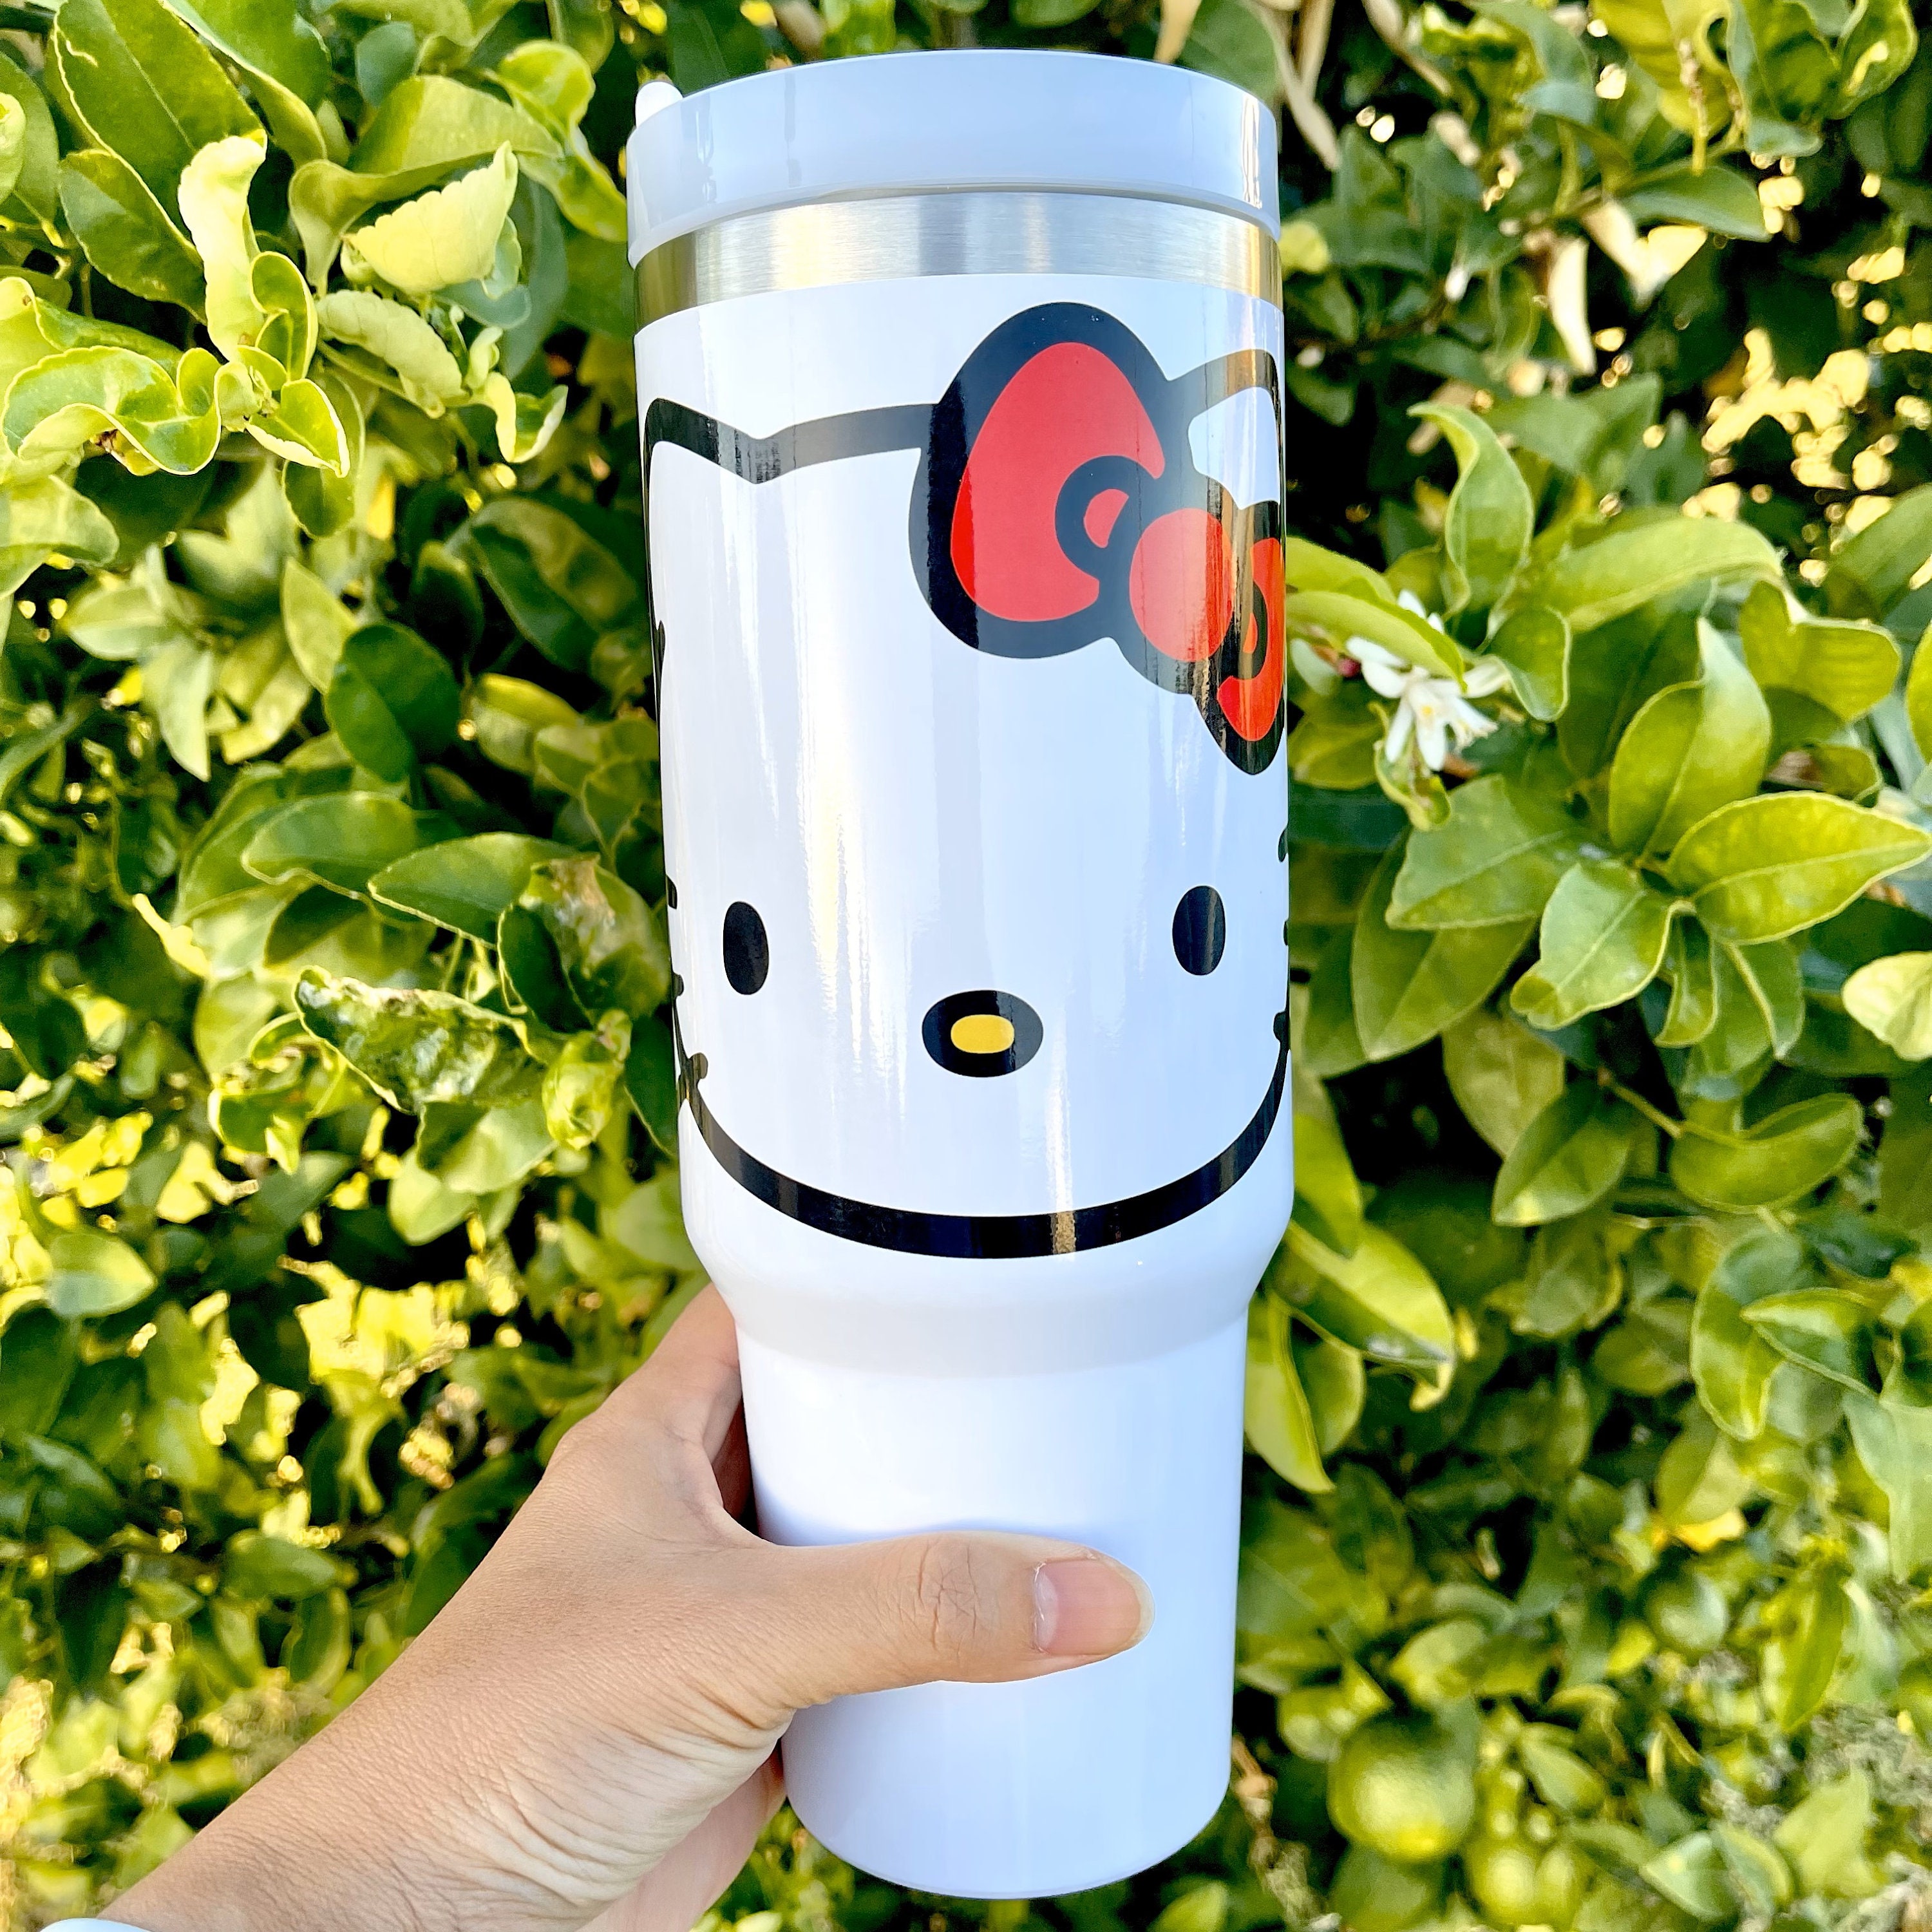 Hello Kitty 40 Oz. Stainless Steel Tumbler With Leak-Proof Lid